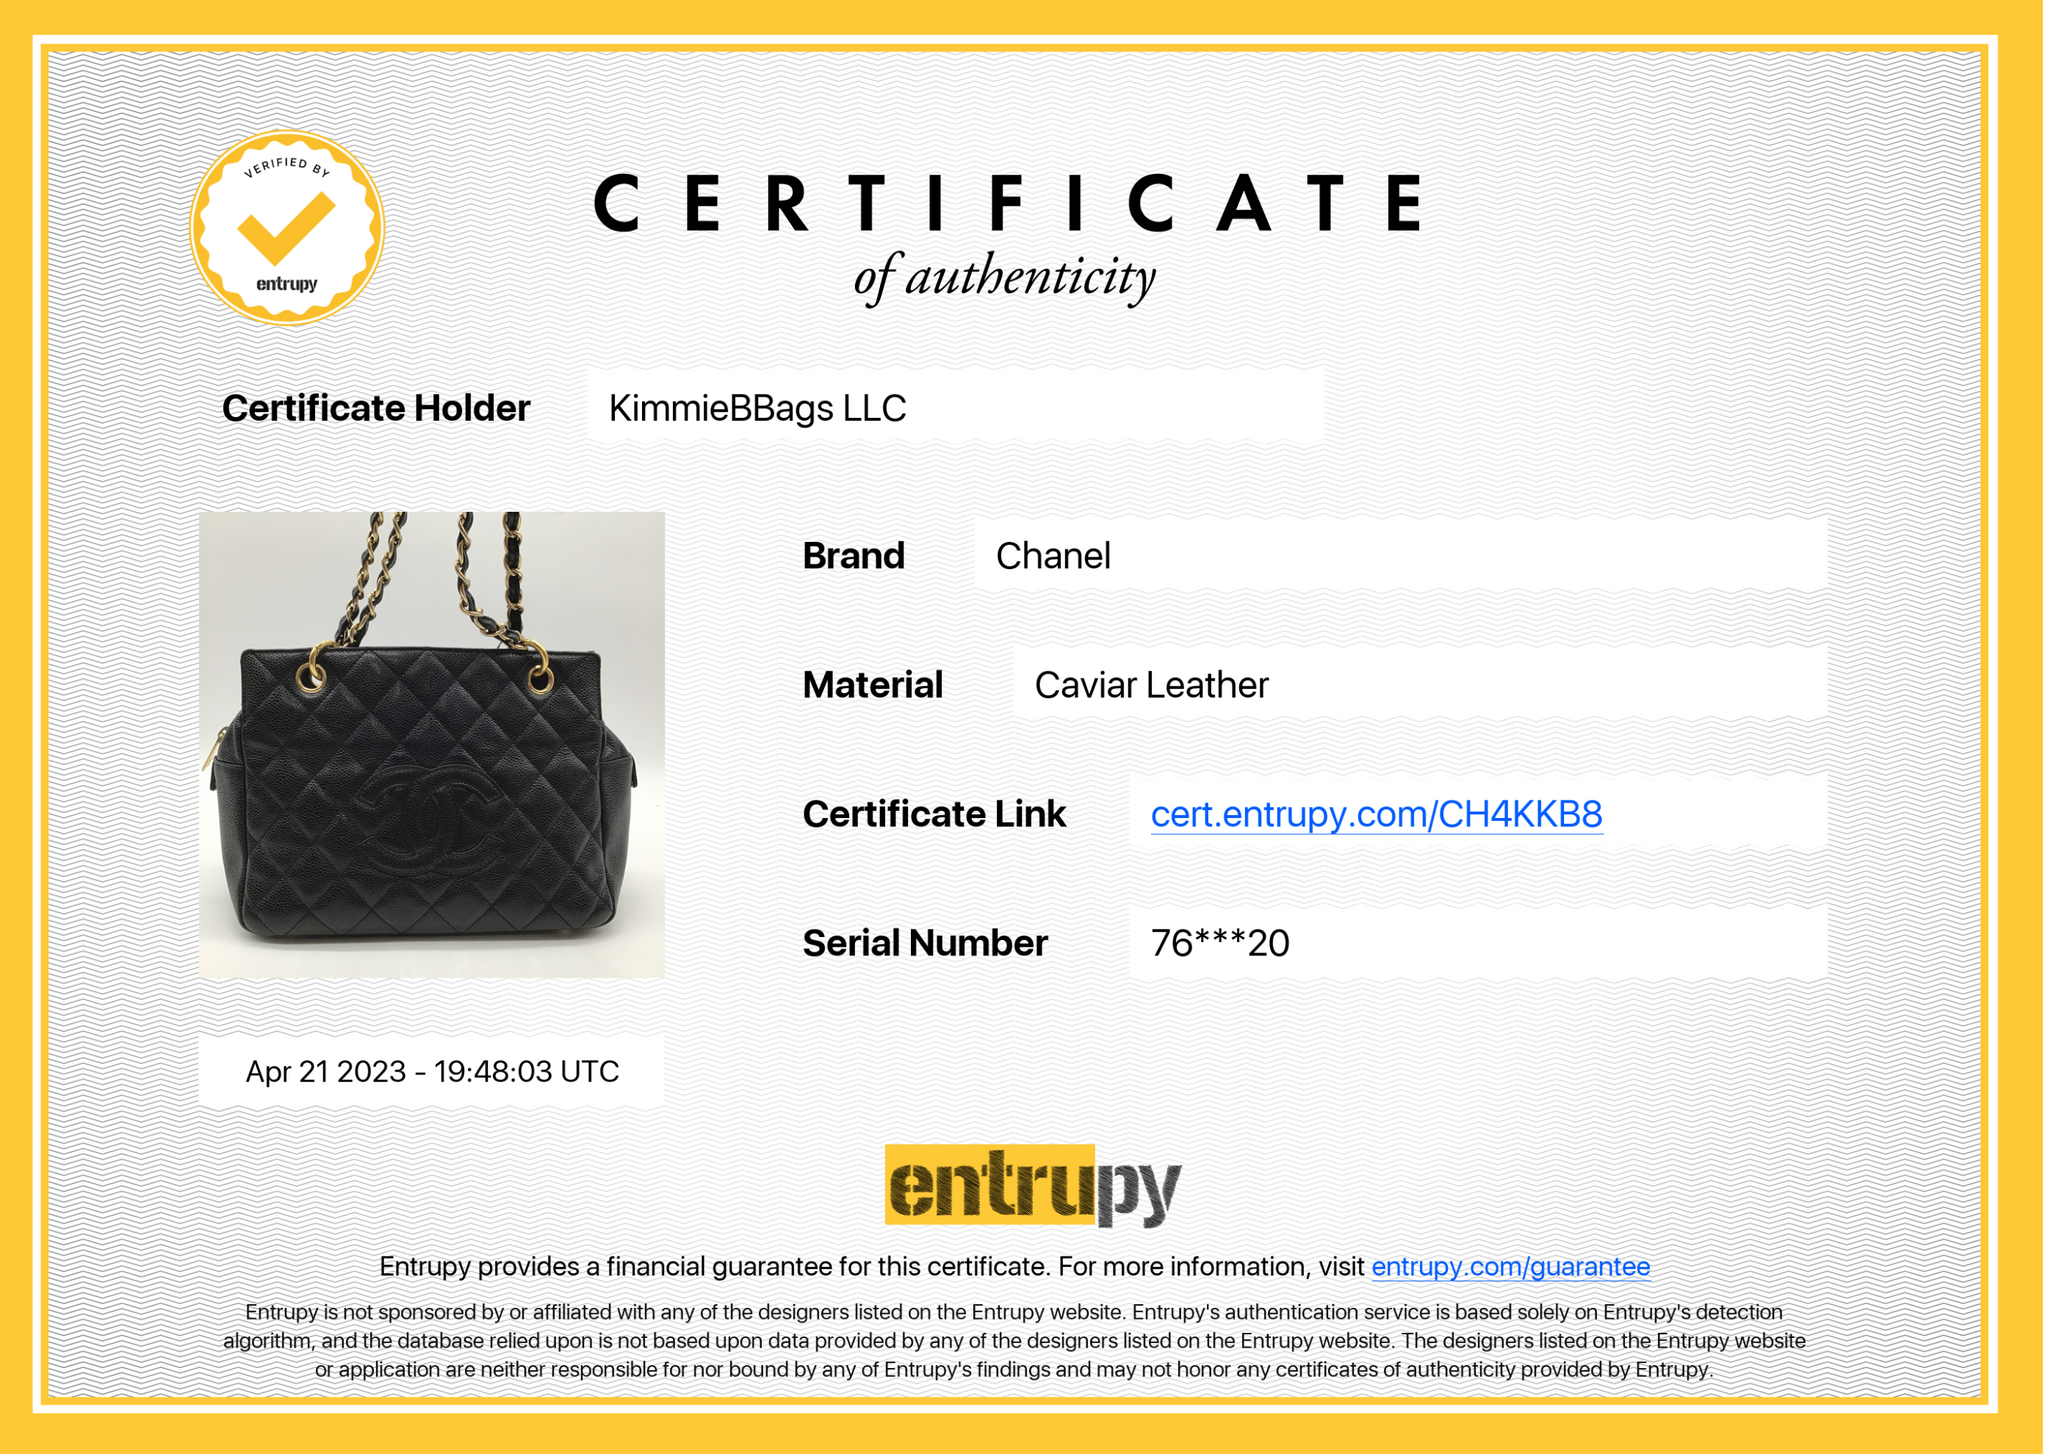 Pre-Owned Chanel Black Quilted Caviar Leather Timeless Shoulder